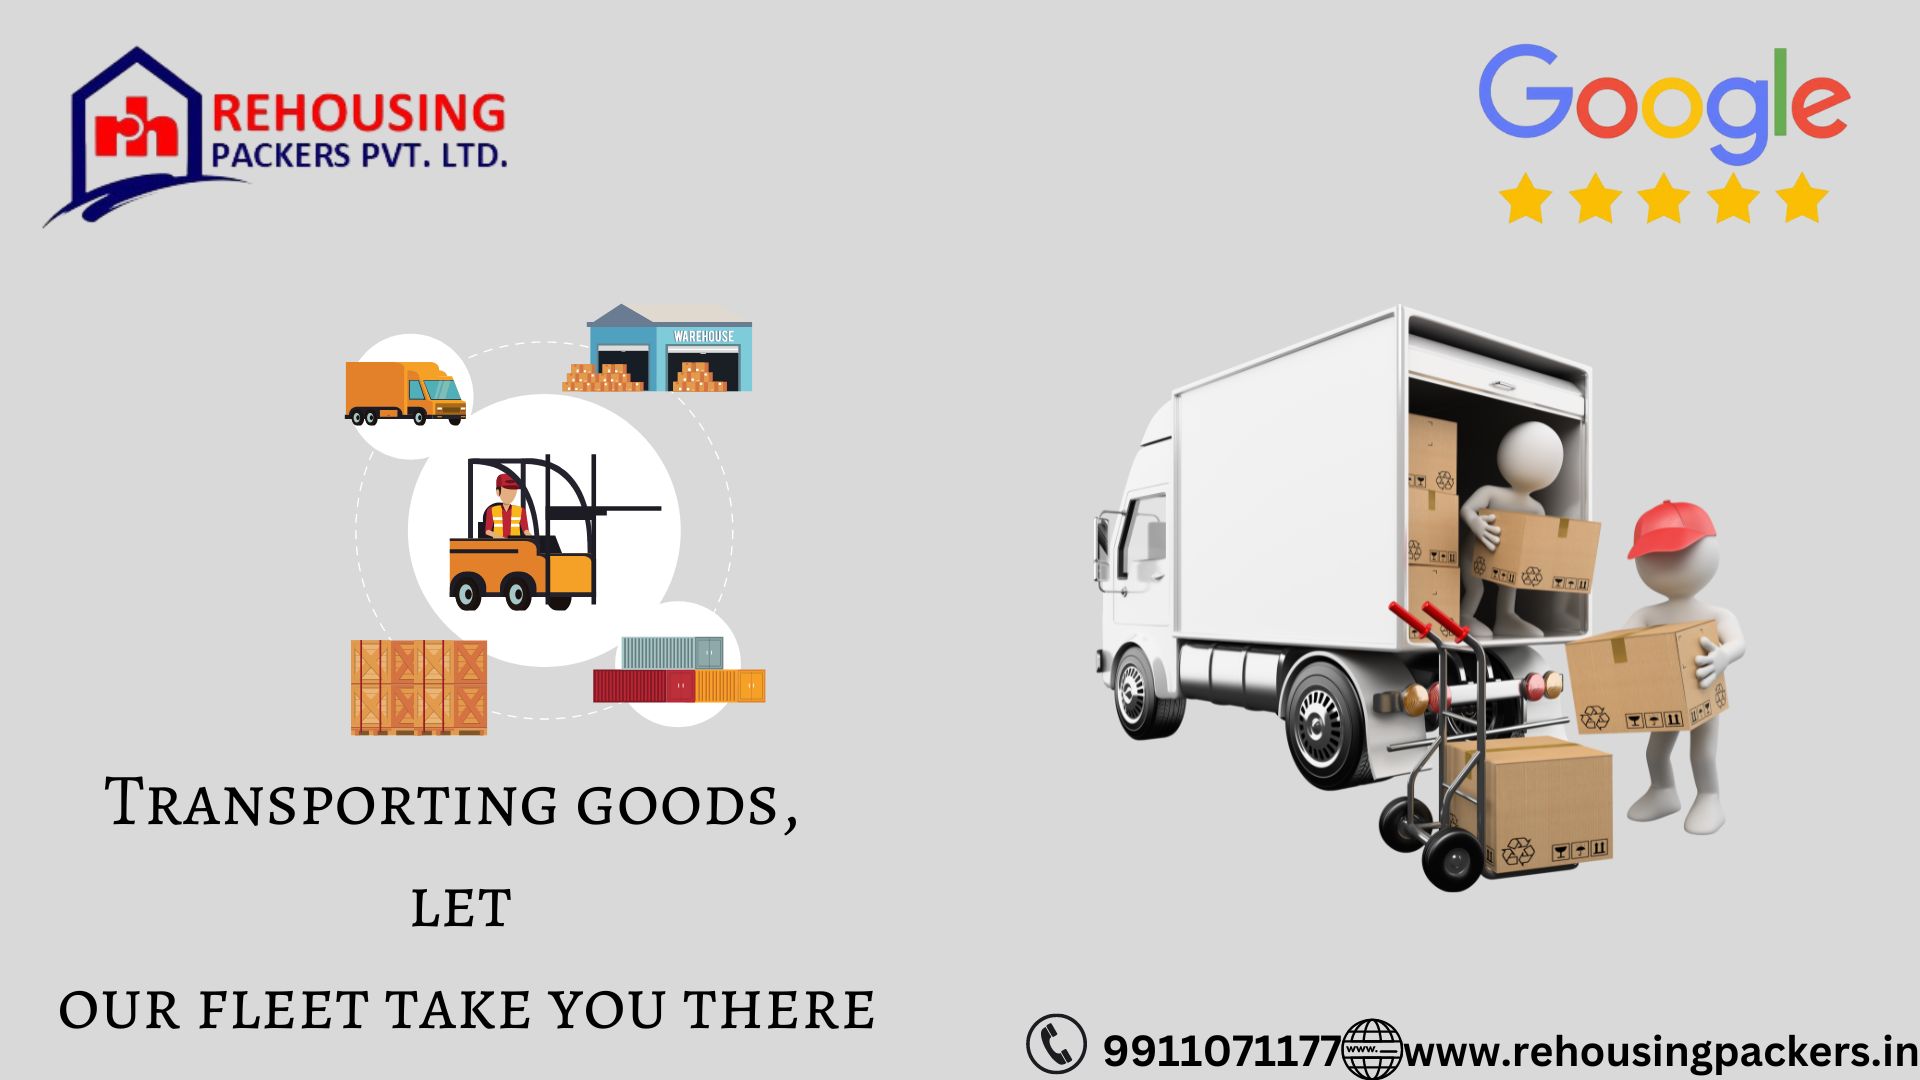 Packers and Movers from Gurgaon to Noida